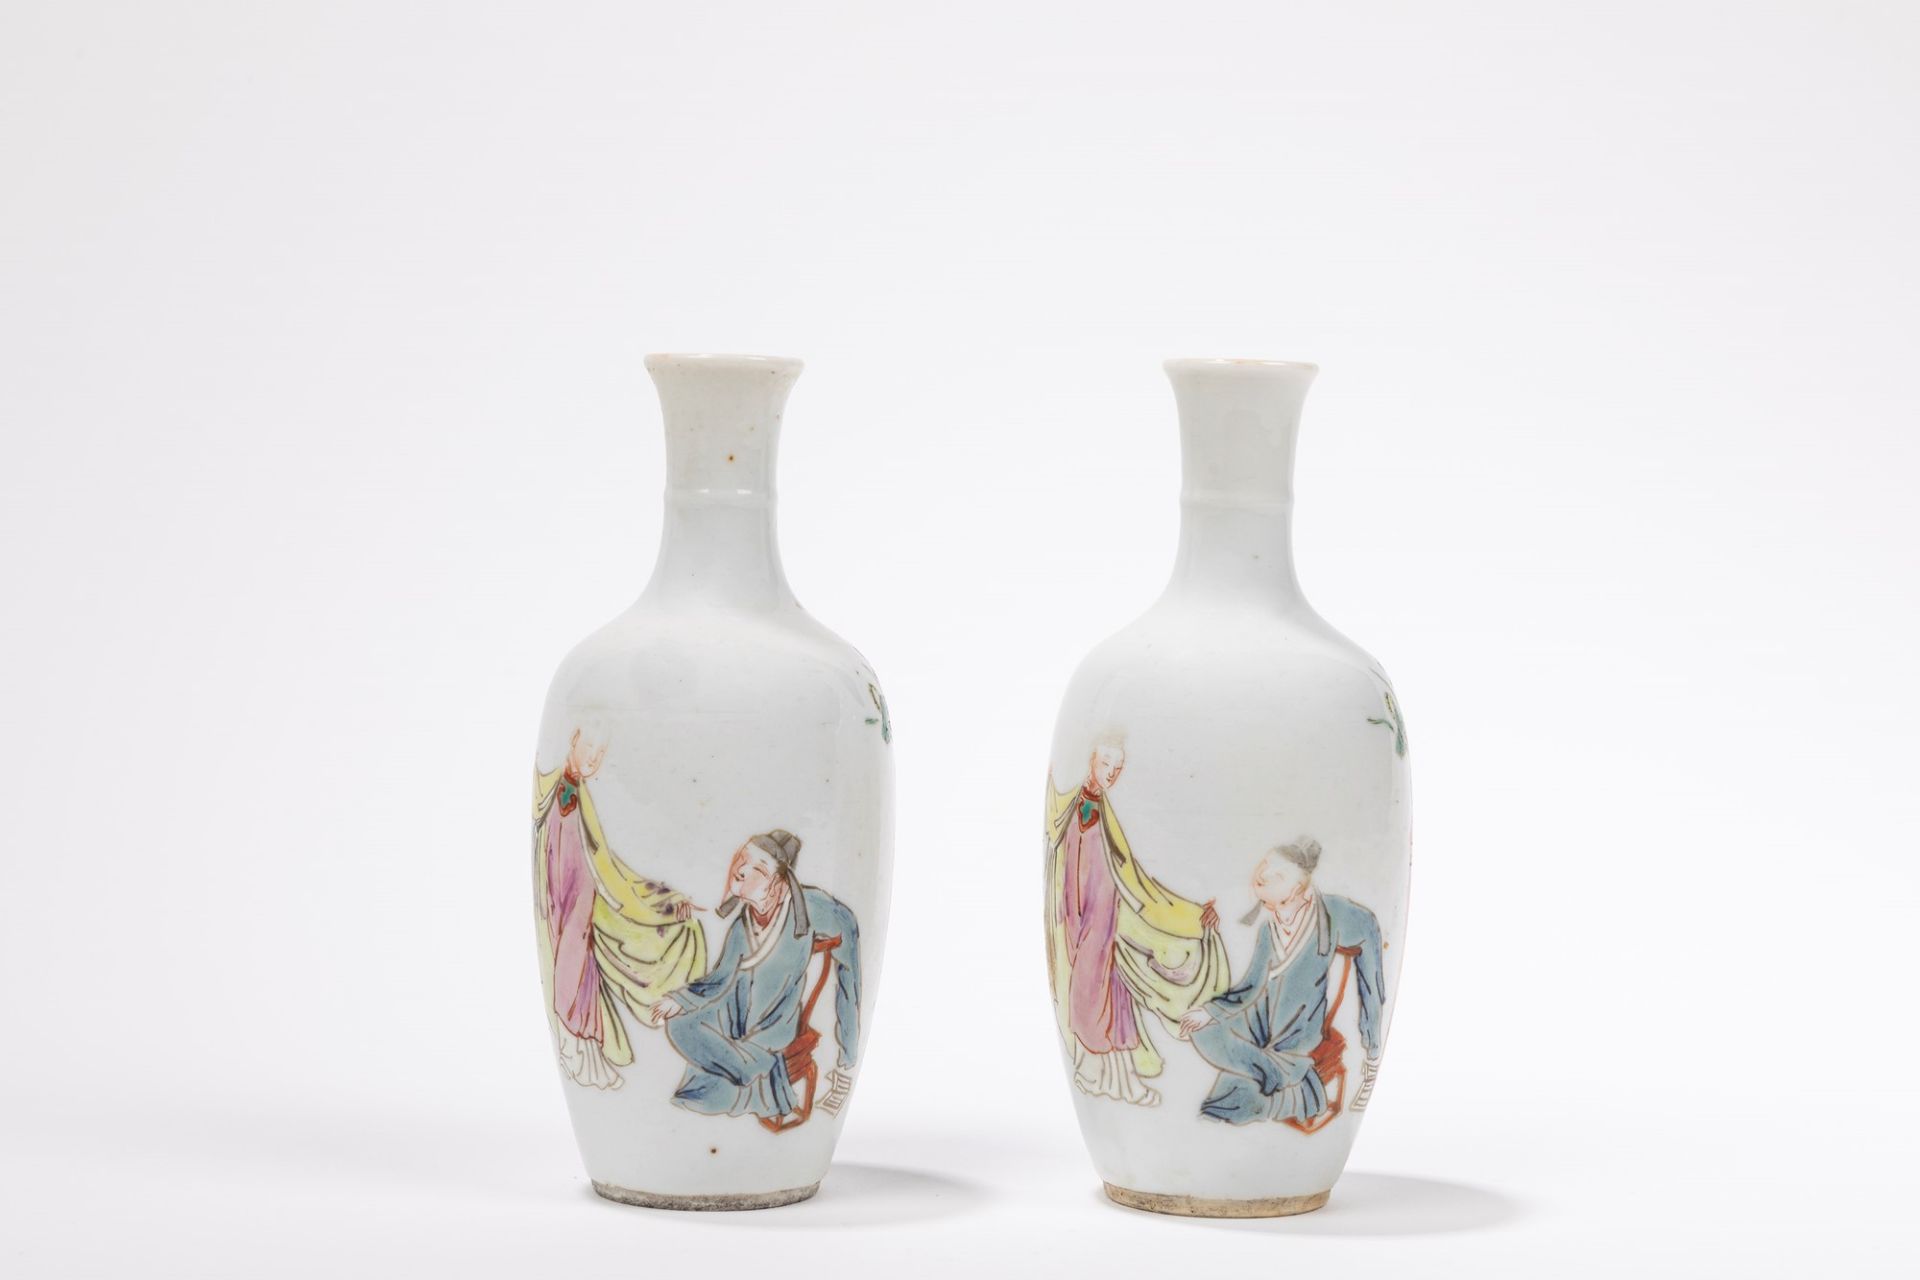 A PAIR OF SMALL FAMILLE ROSE PORCELAIN VASES, China, Qing dynasty, 18th century